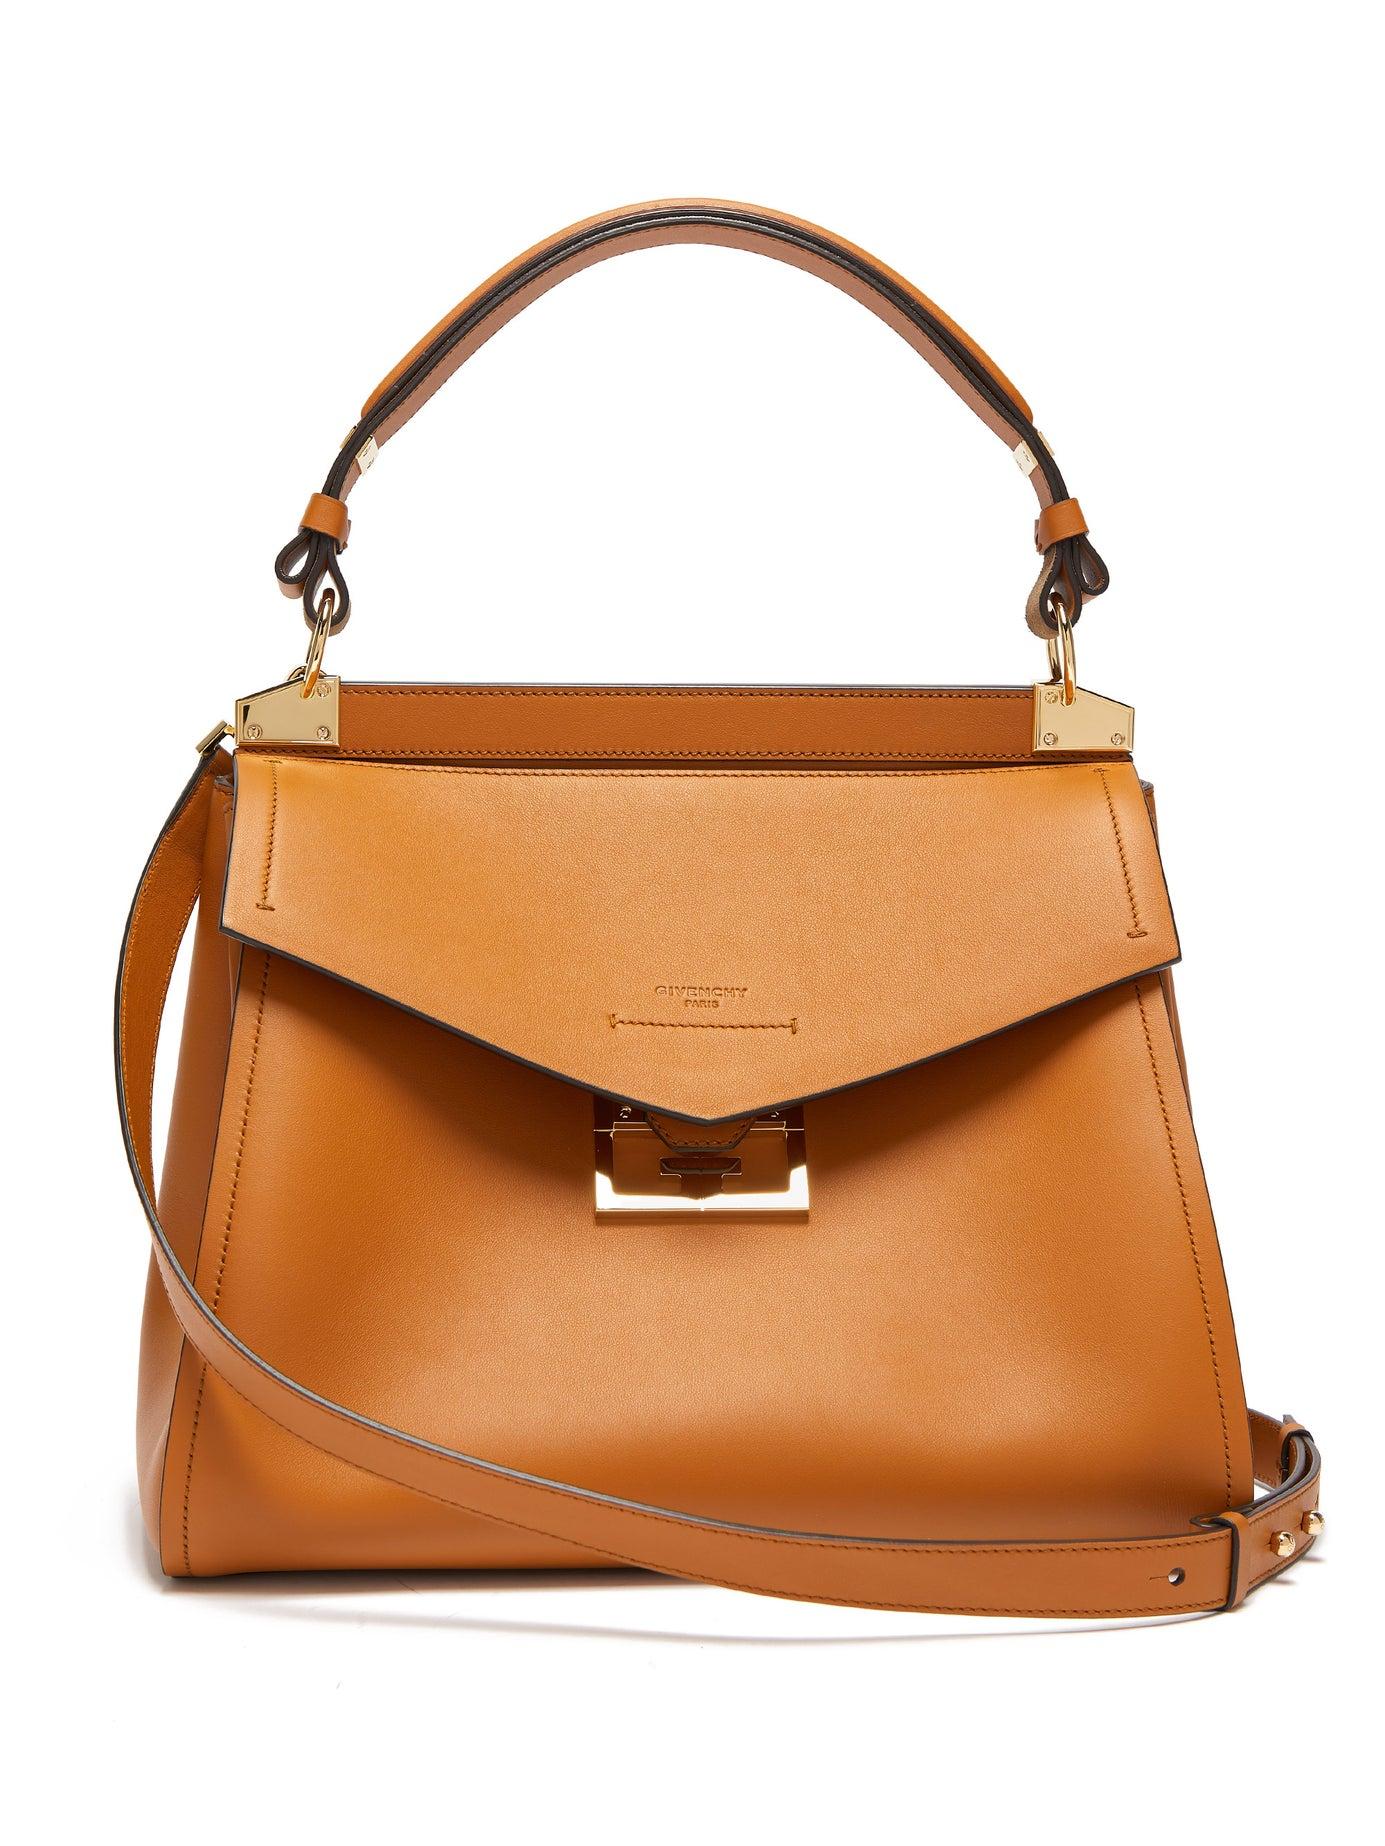 Givenchy Mystic Medium Leather Top Handle Bag in Brown - Lyst